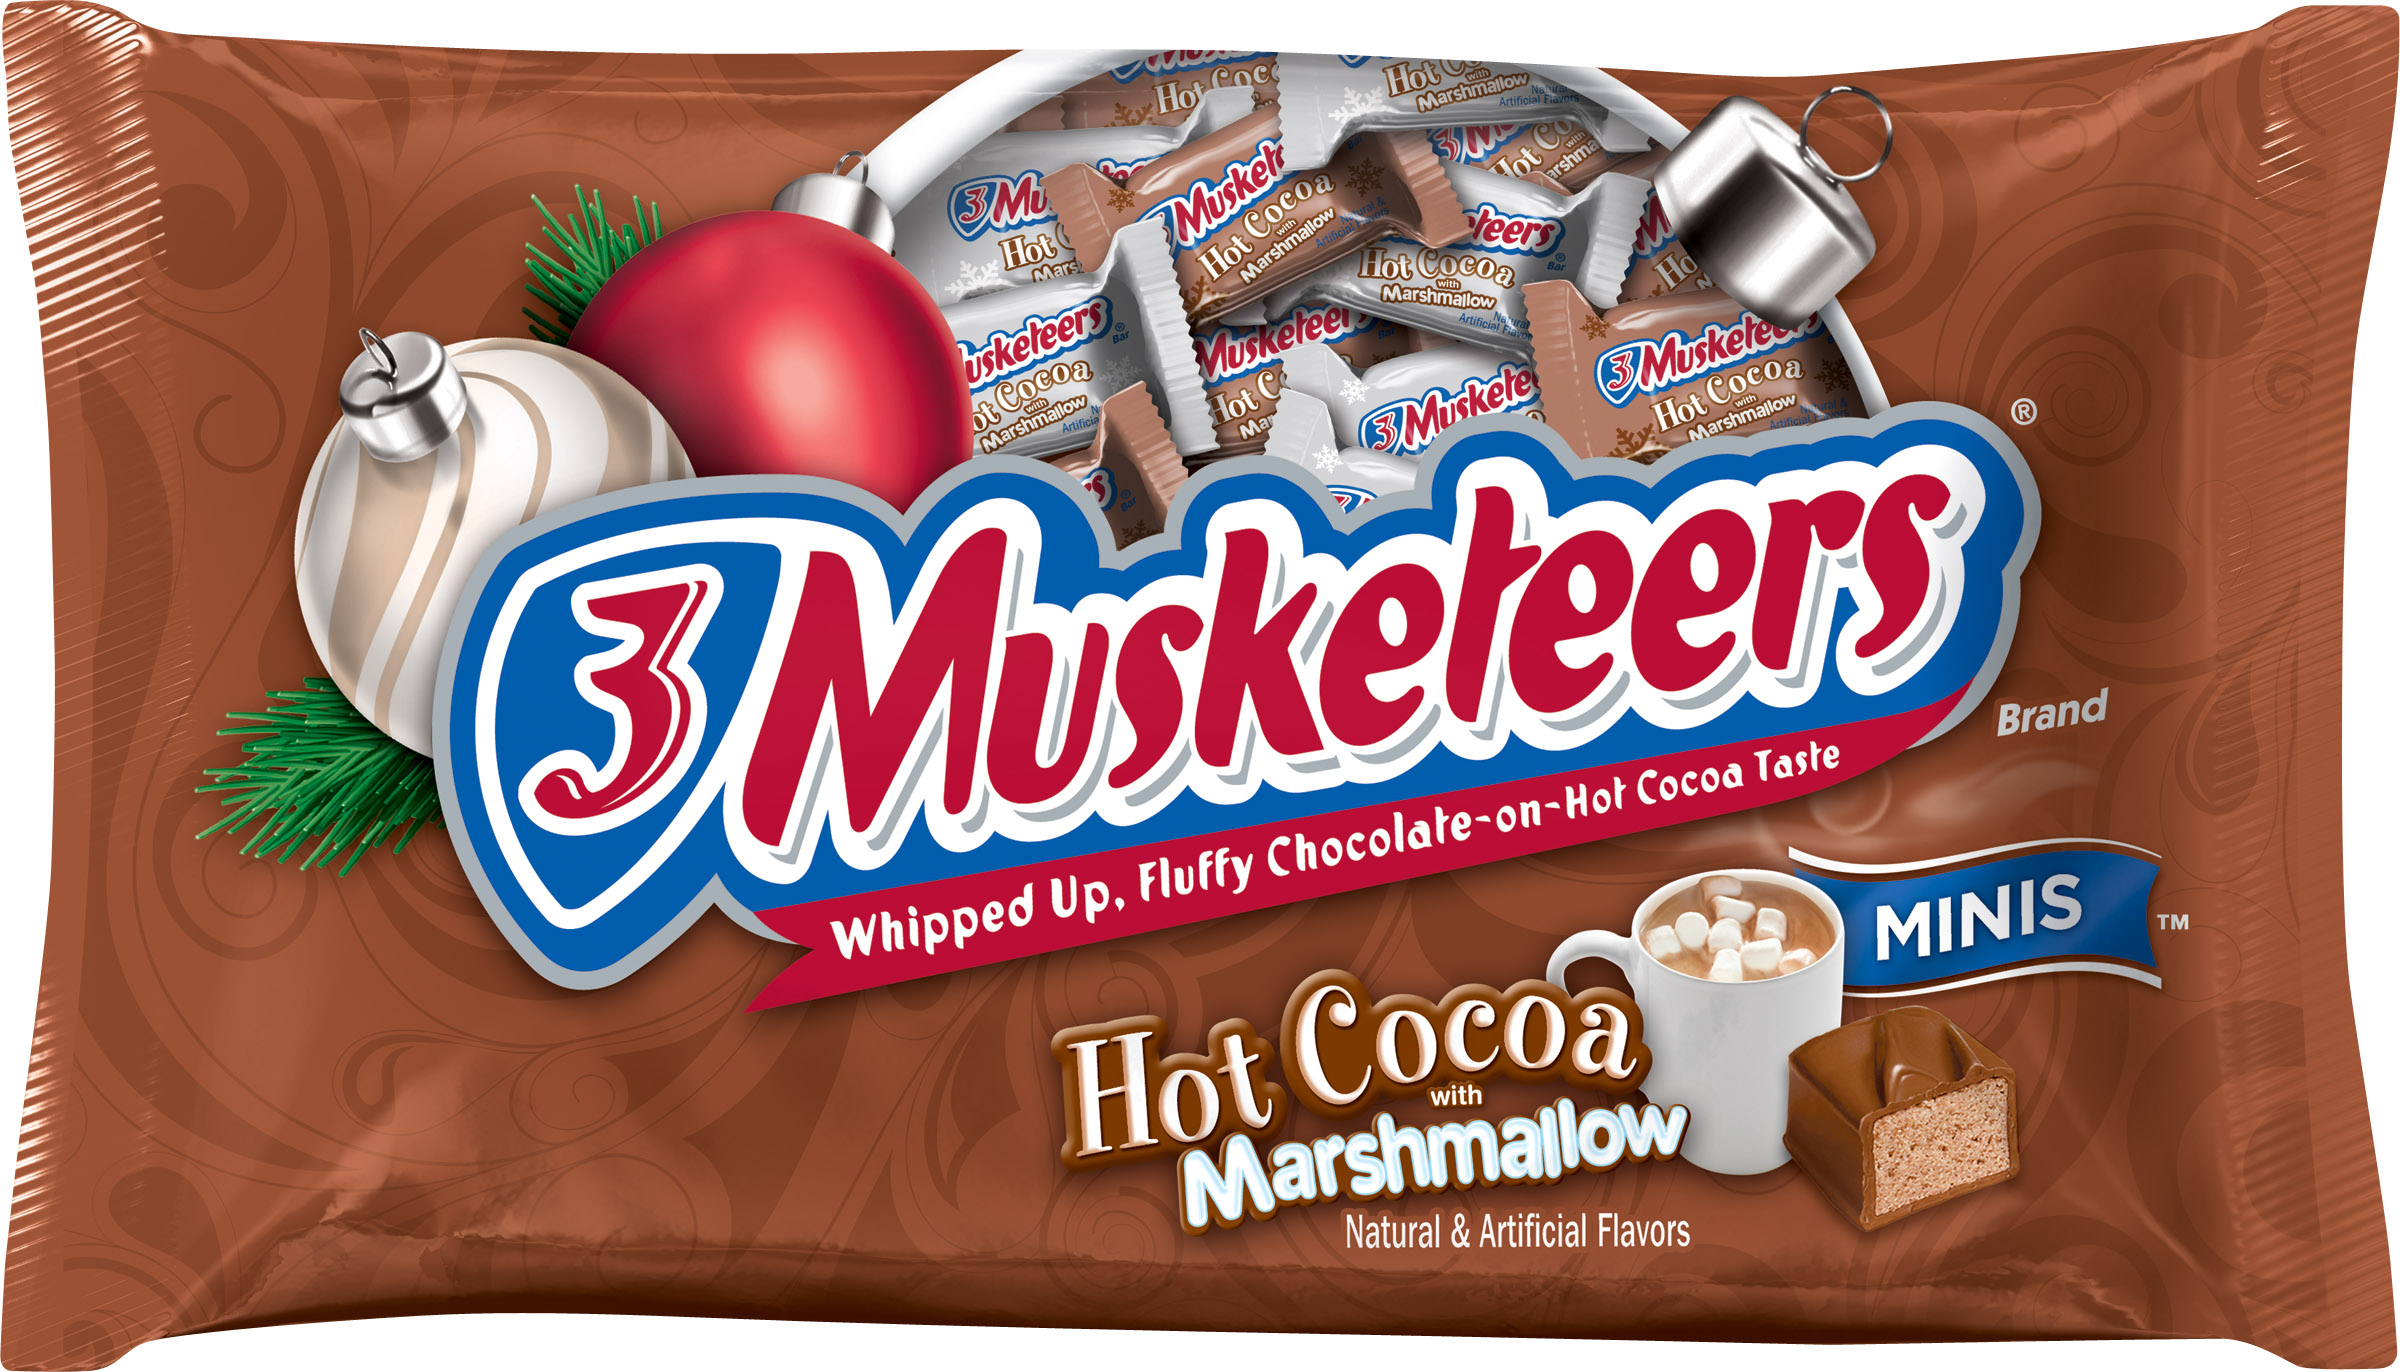 Three Musketeers Hot Cocoa